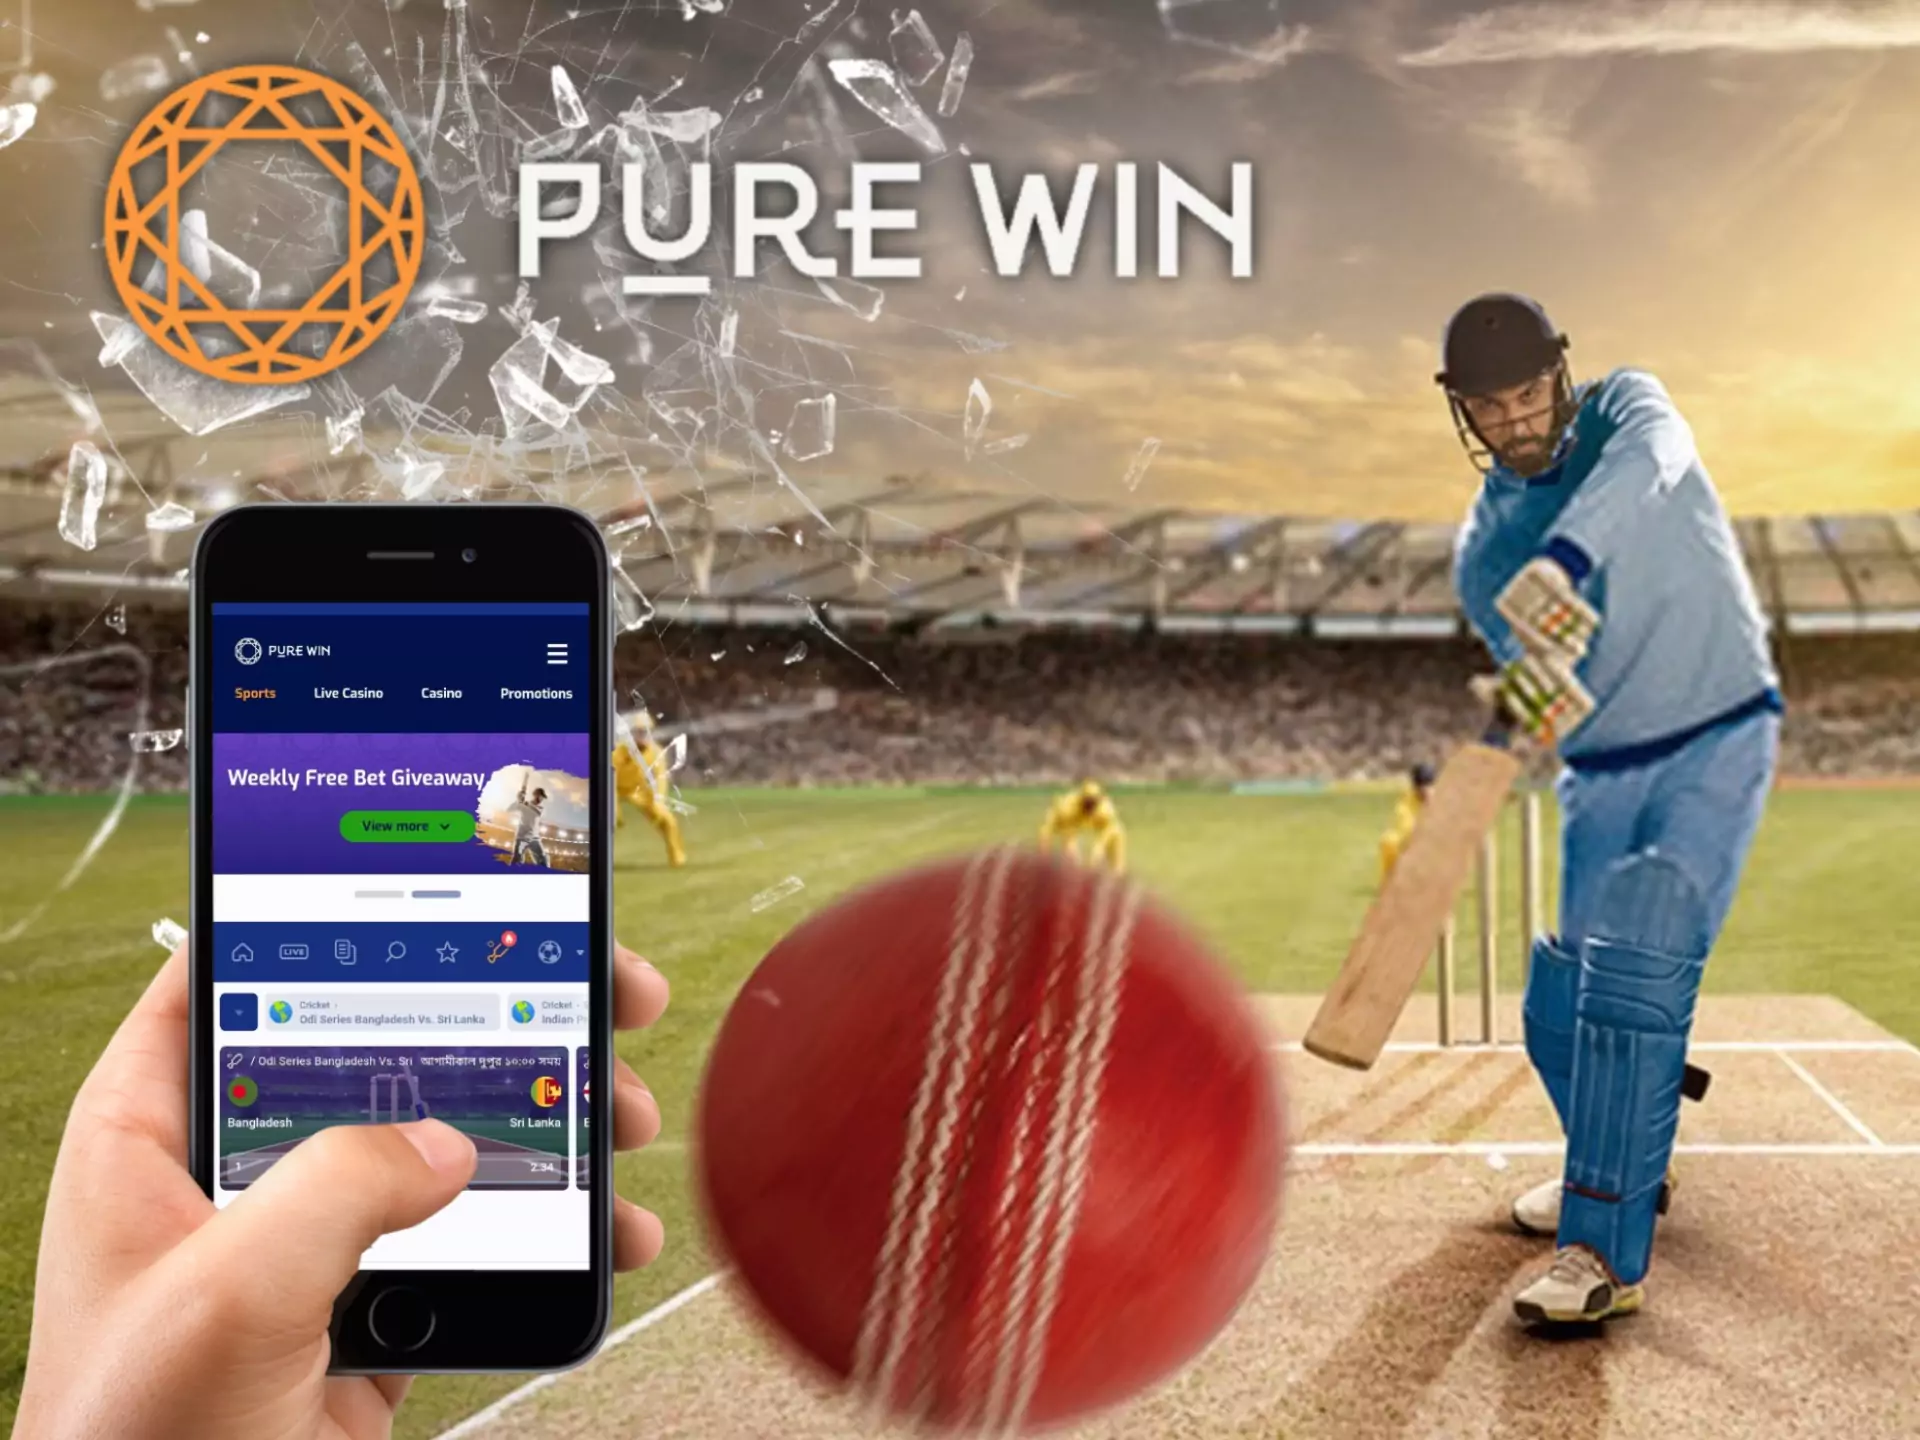 There are a lot of profitable bets on cricket ar Pure Win.